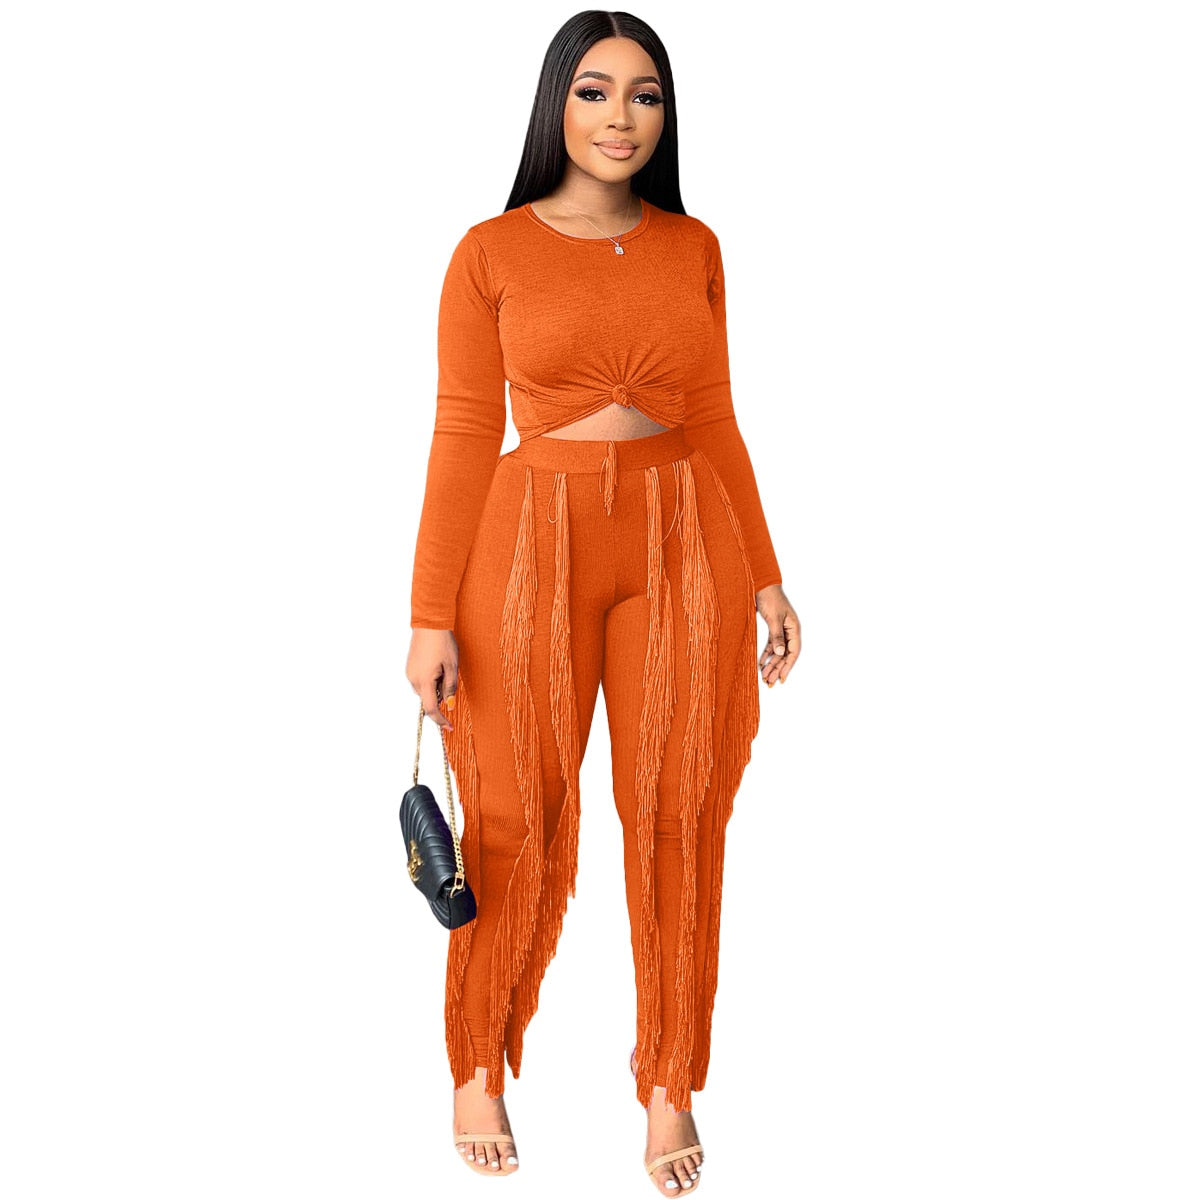 MUDAN Street Knit Ribbed Women Set Long Sleeve T-shirt and Tassel Pants Suit Elegant Tracksuit Two Piece Set Fitness Outfit